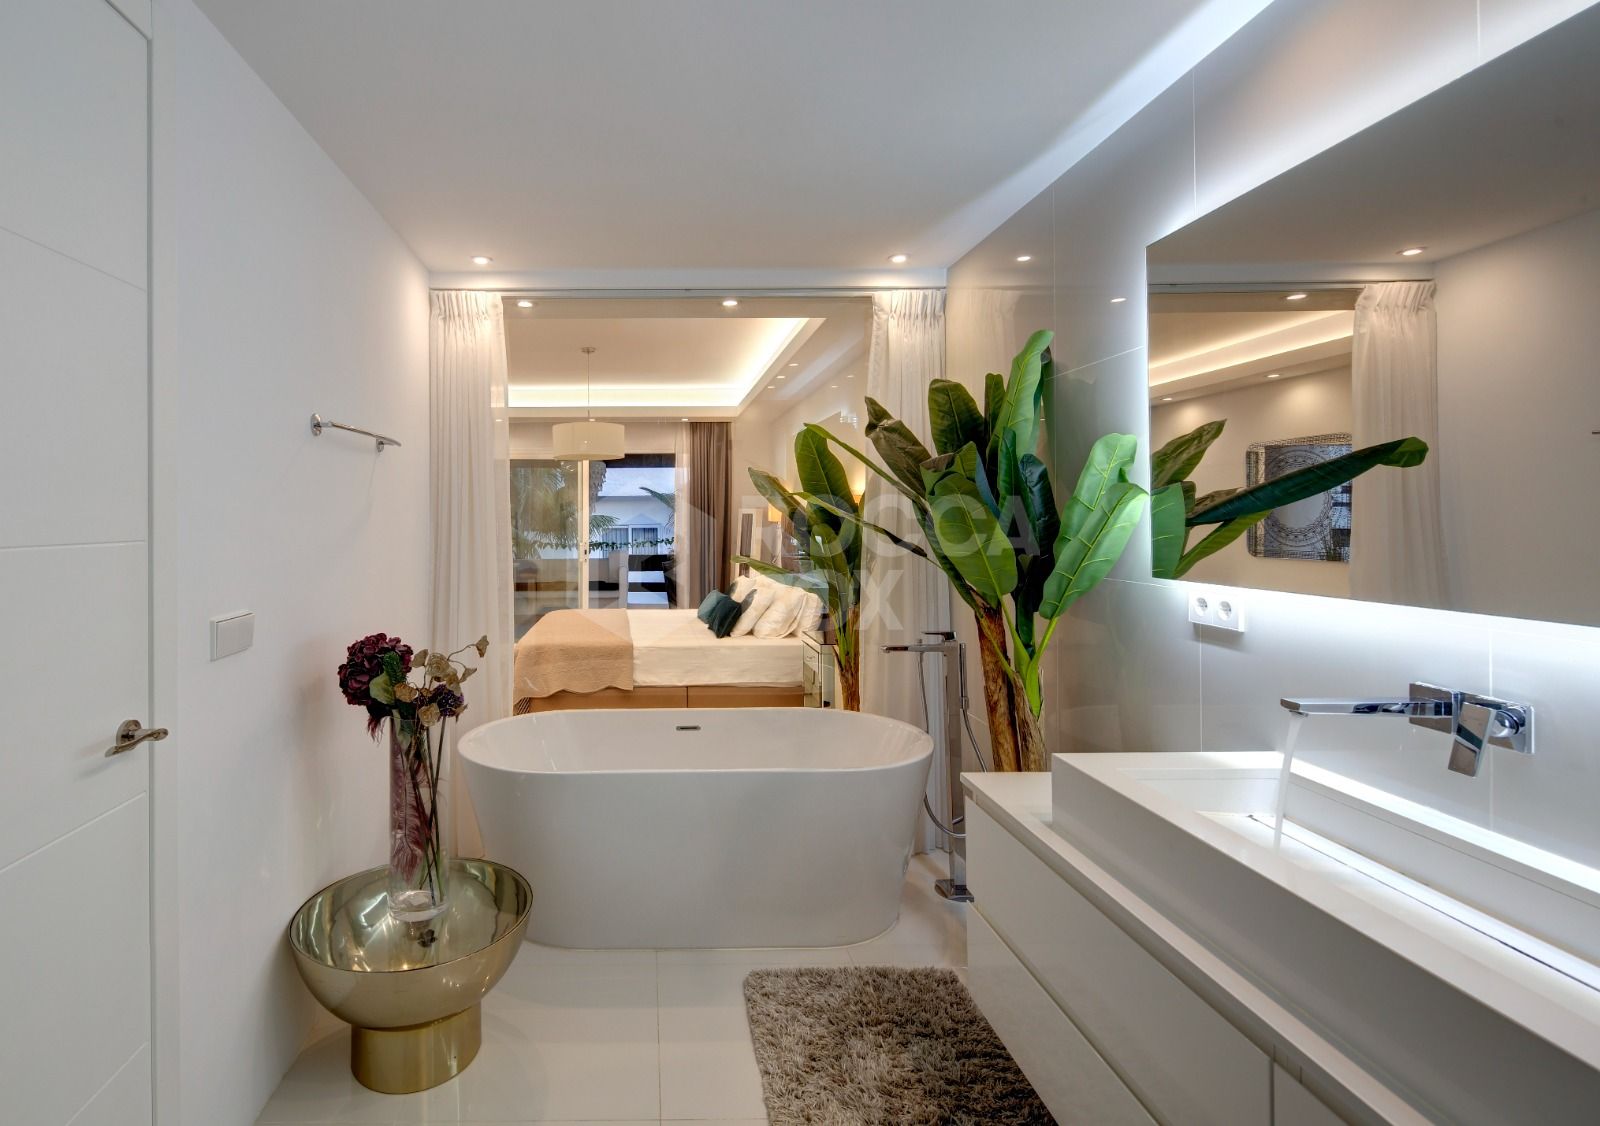 Luxury 3 bed apartment in the heart of the iconic Puente Romano